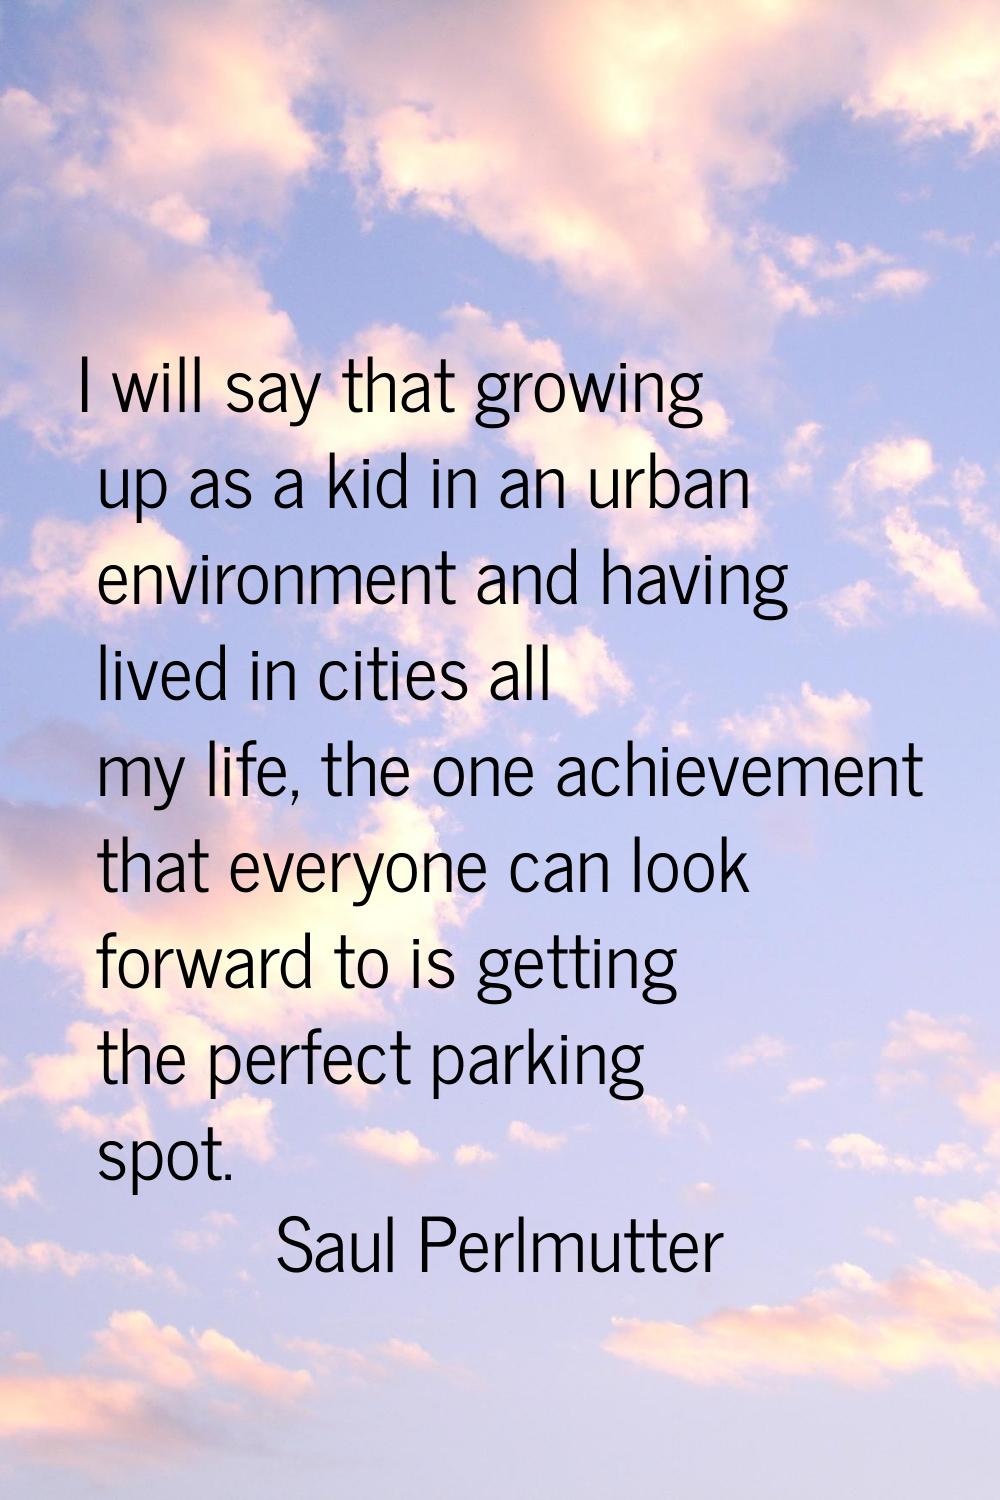 I will say that growing up as a kid in an urban environment and having lived in cities all my life,